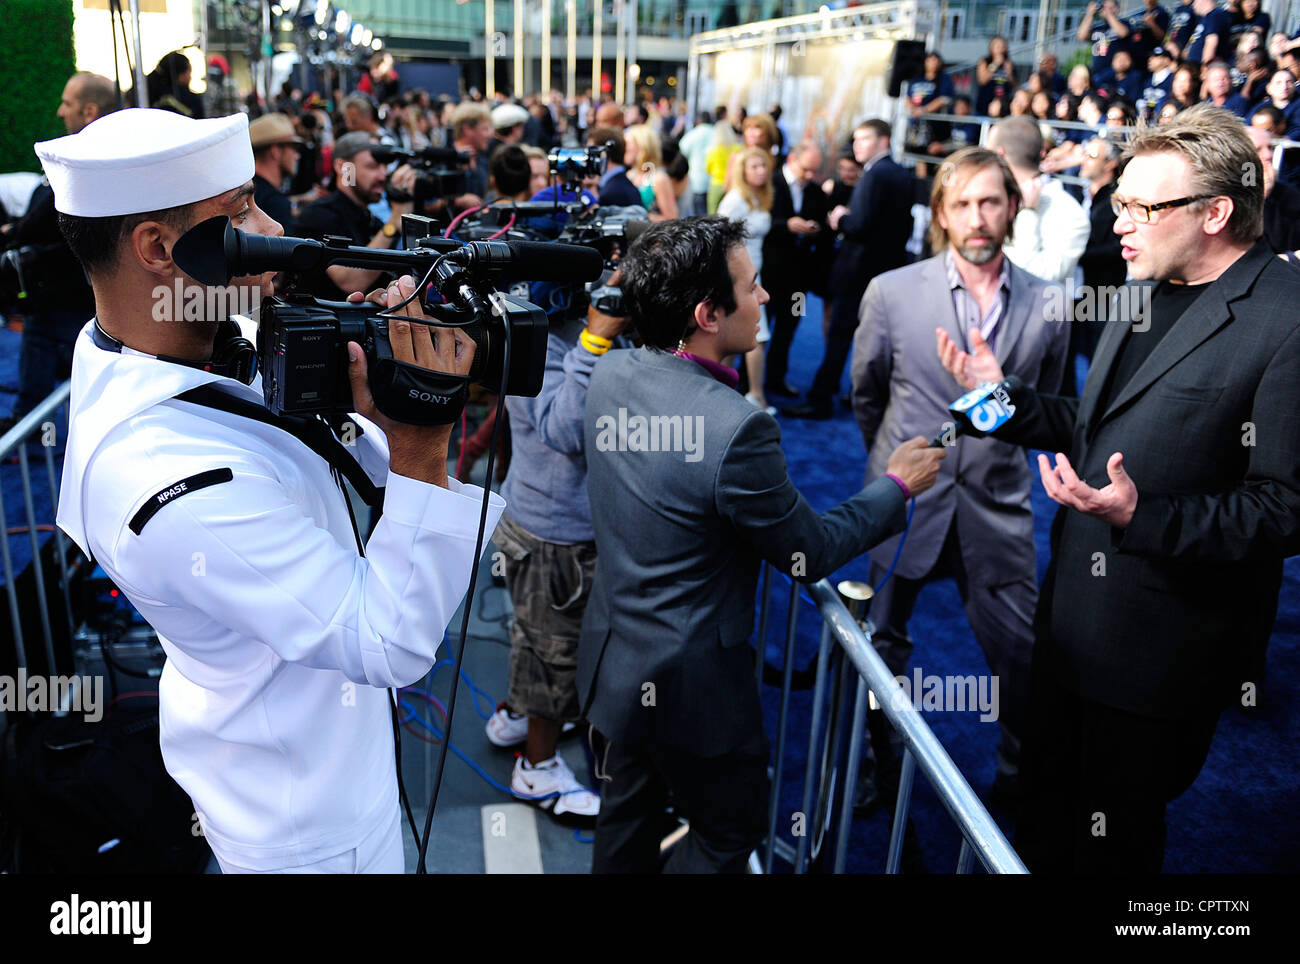 Mass Communication Specialist 3rd Class David Hooper, films an interview between a KTLA Channel 5 reporter and writers of the movie “Battleship,' Jon and Erich Hoeber, on the 'blue' carpet at the premiere of the film. Universal Pictures gave service members the celebrity treatment alongside cast members of the movie and invited them to attend the special screening of the film prior to its release in more than 3,000 theaters nationwide. Stock Photo